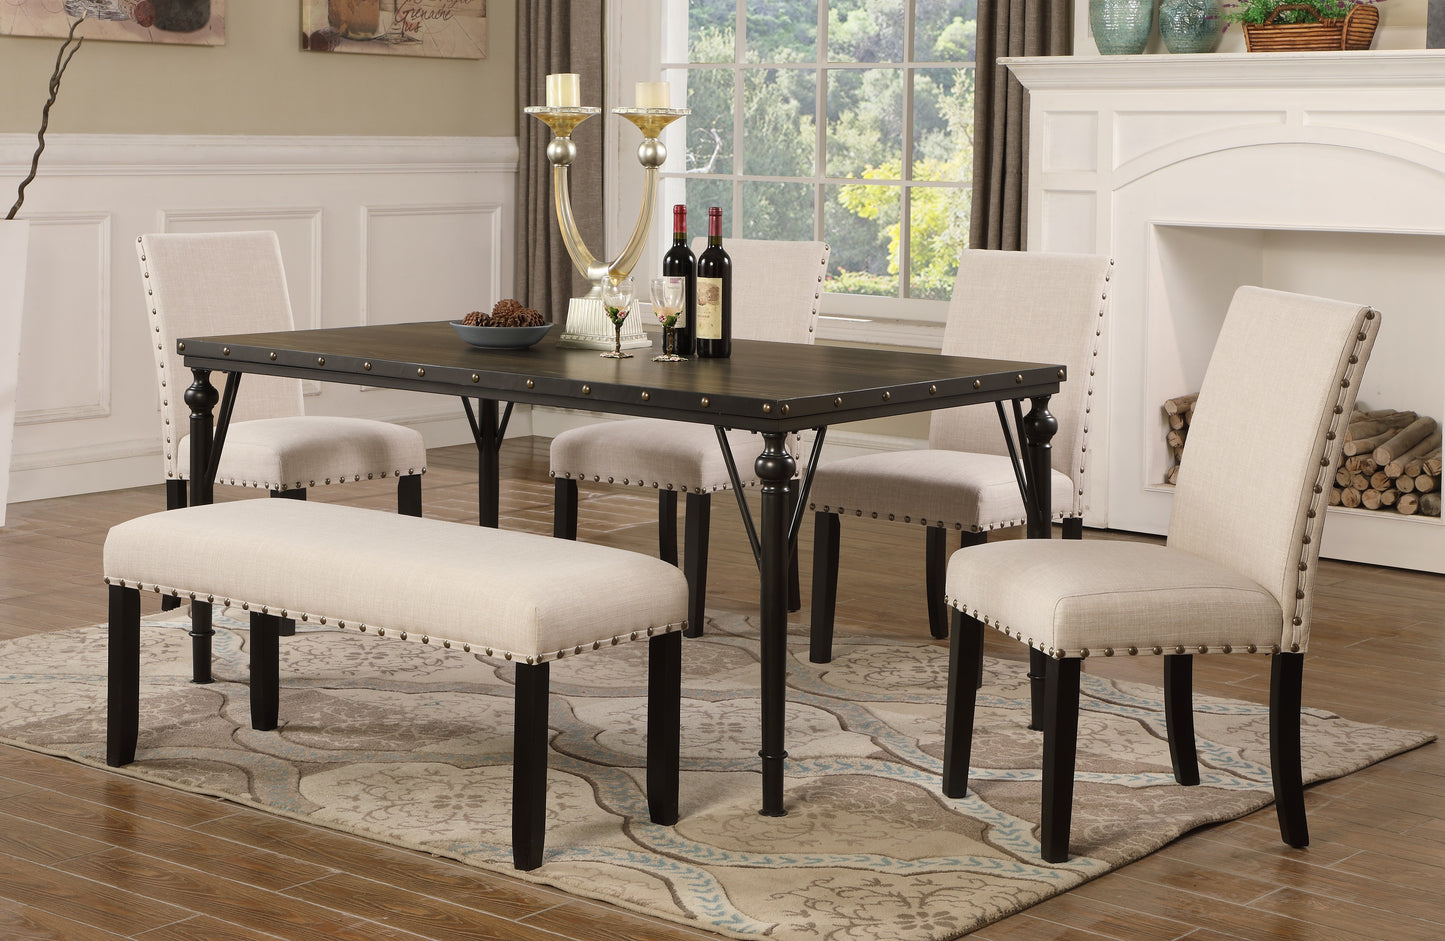 Biony 6-Piece Espresso Wood Dining Set with Tan Fabric Nailhead Chairs and Dinning Bench